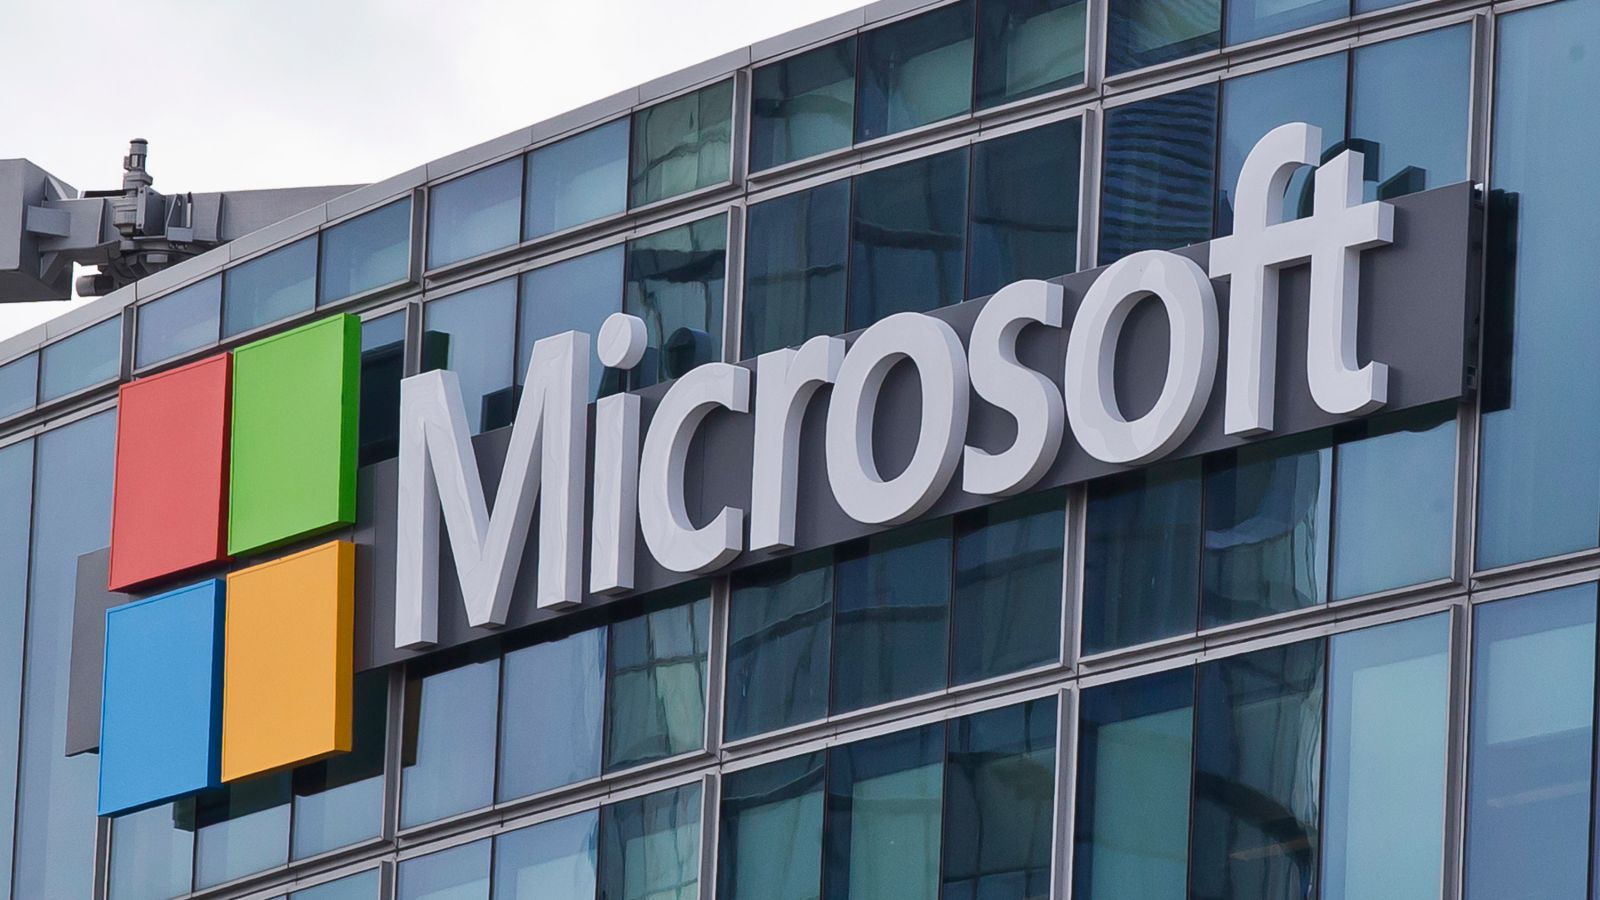 Microsoft opened its first "Internet of Things" laboratory in Europe